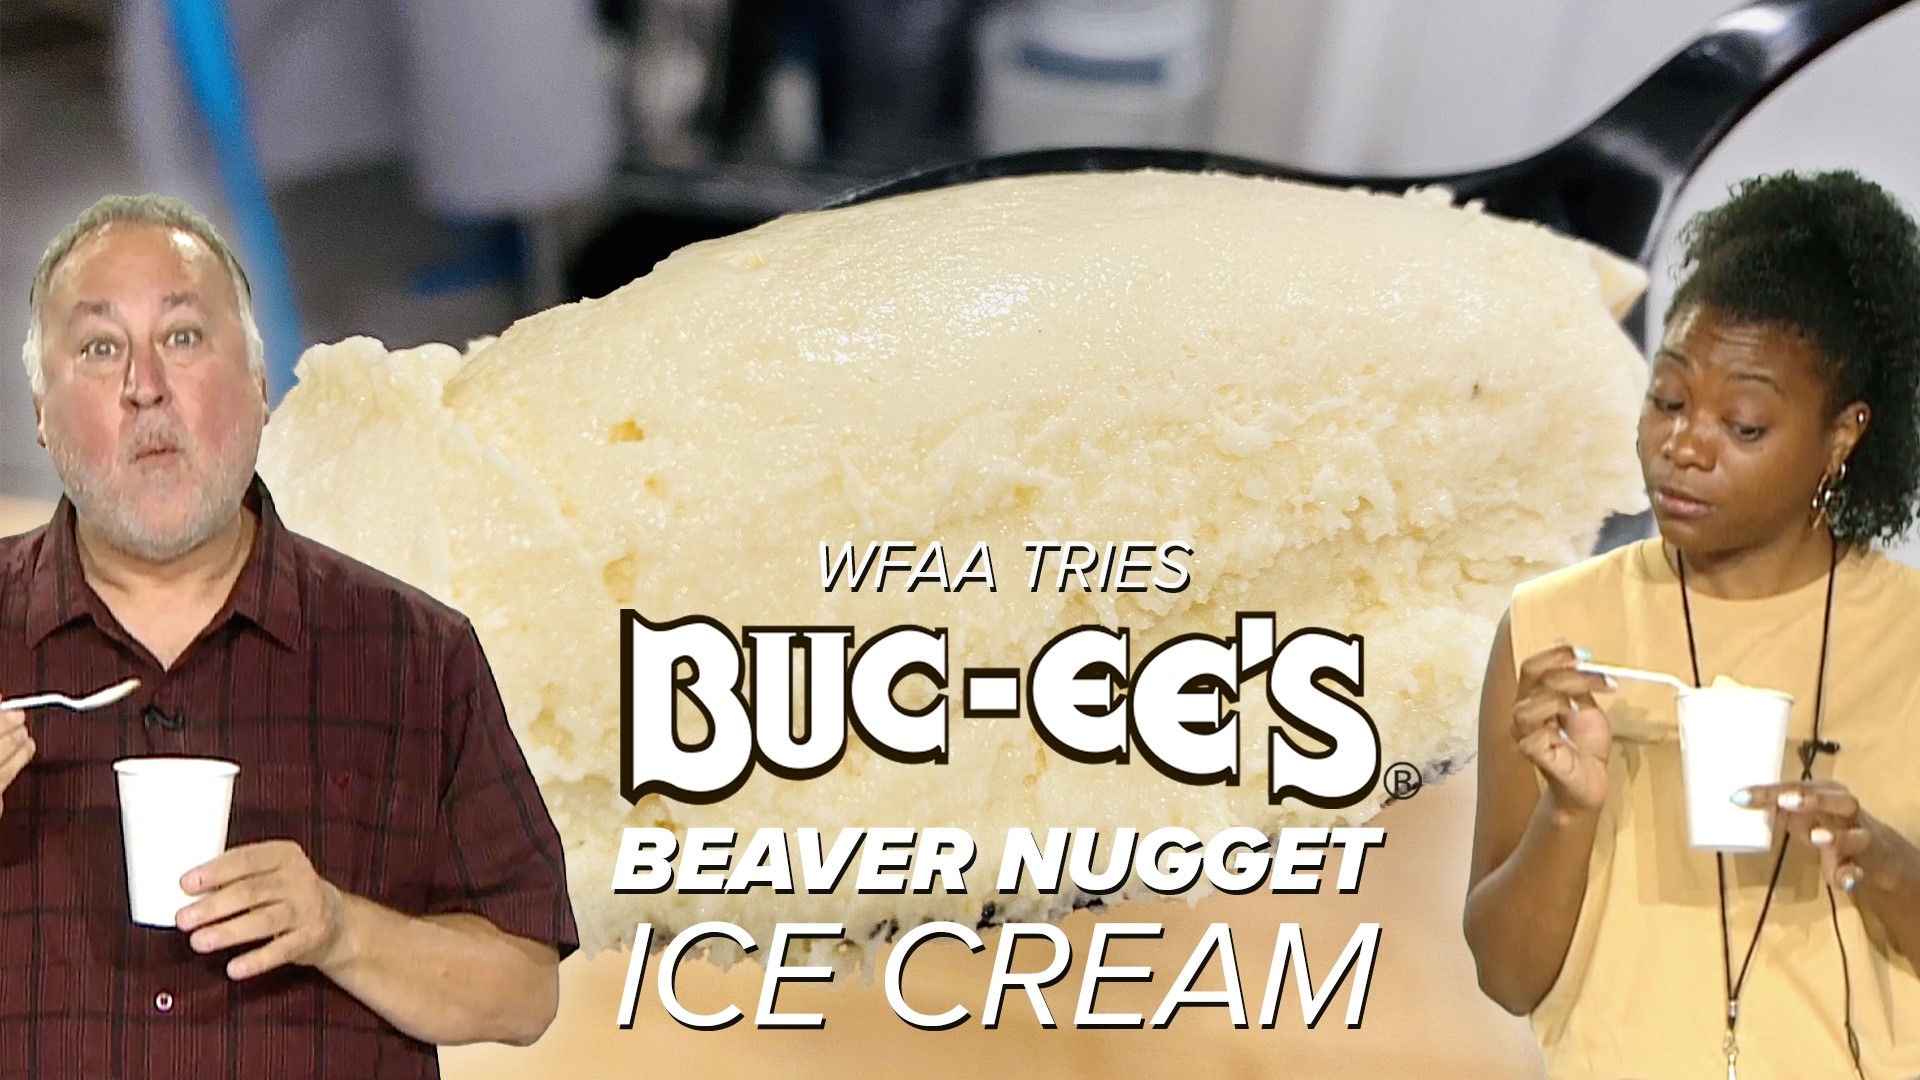 WFAA tries ice cream inspired by iconic Buc-ee's Beaver Nuggets.